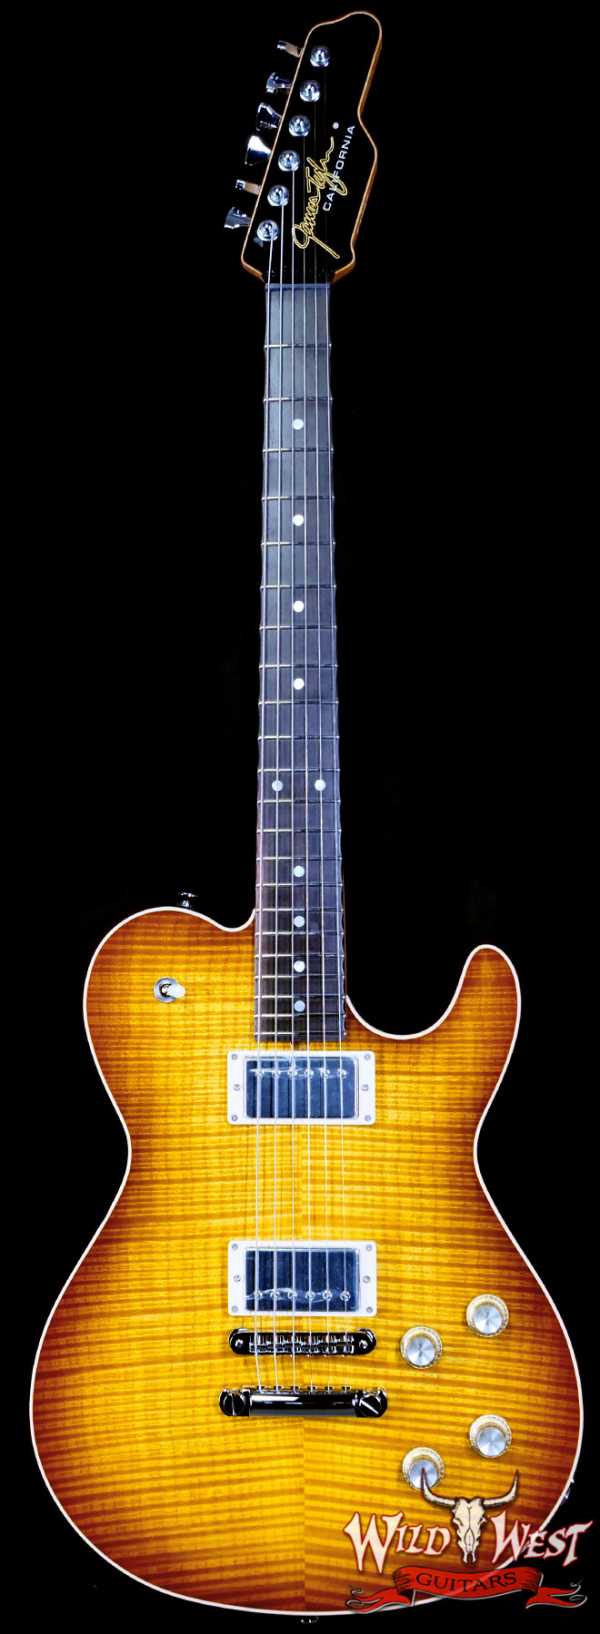 James Tyler USA Mongoose Special Flame Maple Top Brazilian Rosewood Fingerboard Honey Burst 6.80 LBS (US Only / No International Shipping)